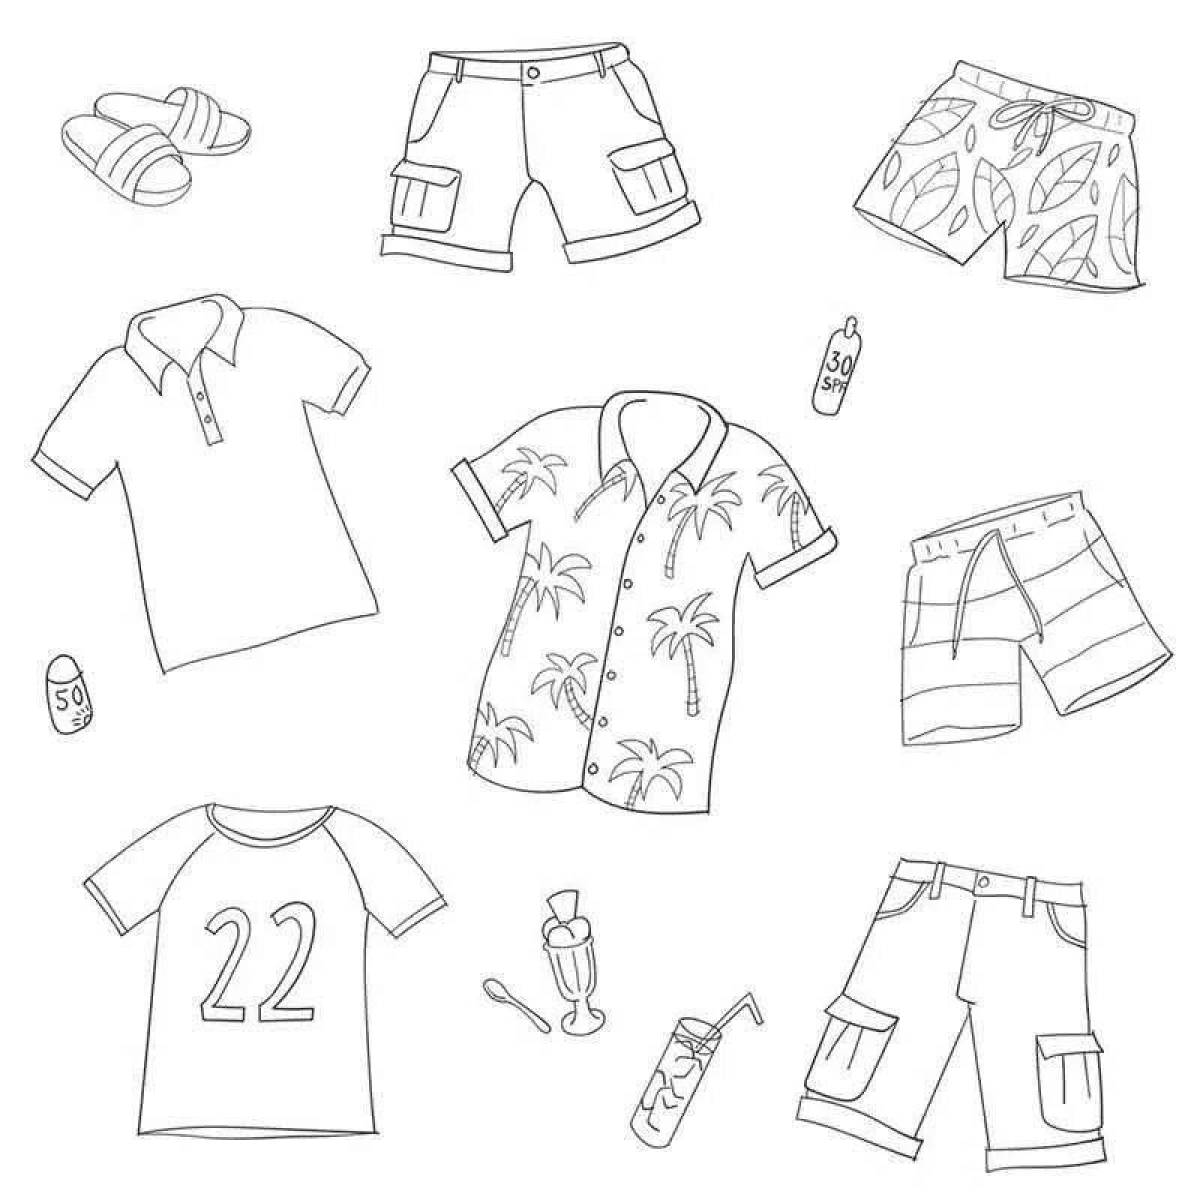 Charming jersey coloring book